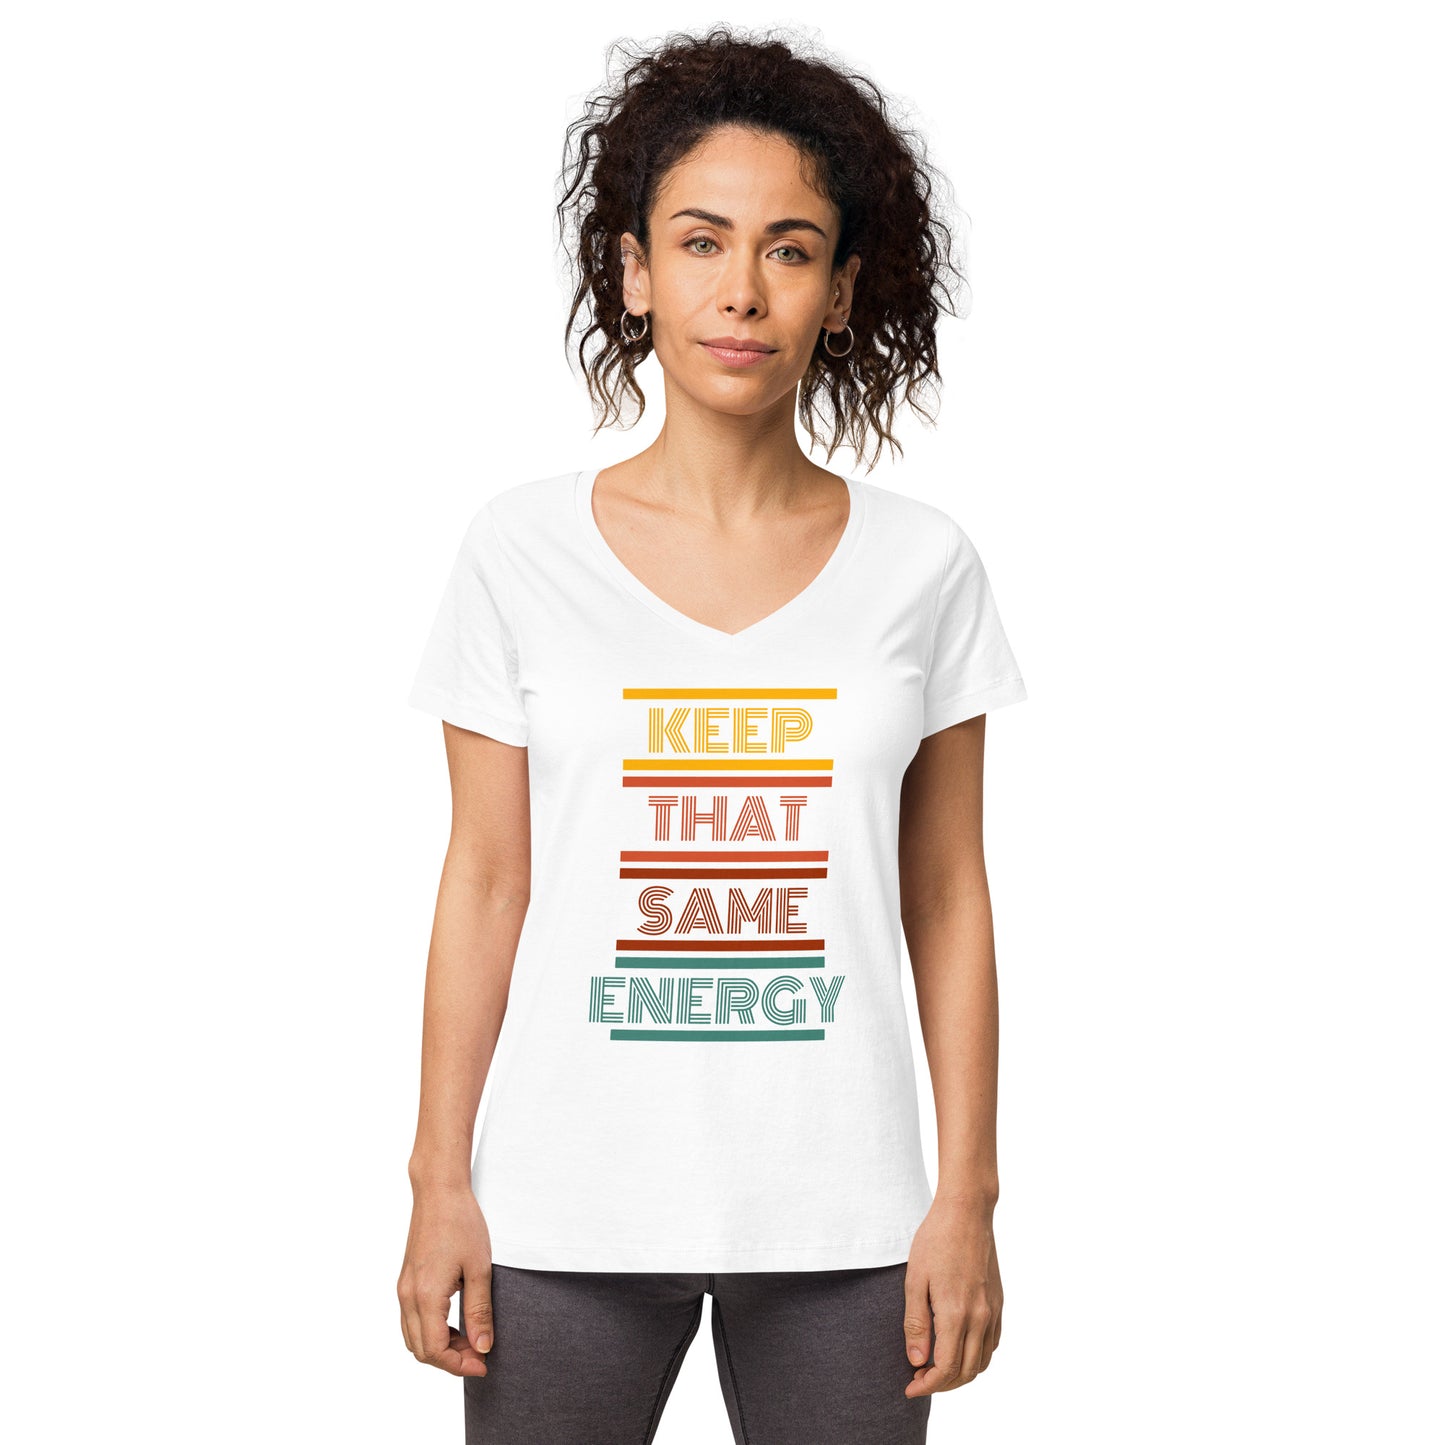 KEEP THAT SAME ENERGY Women’s Fitted V-Neck T-Shirt